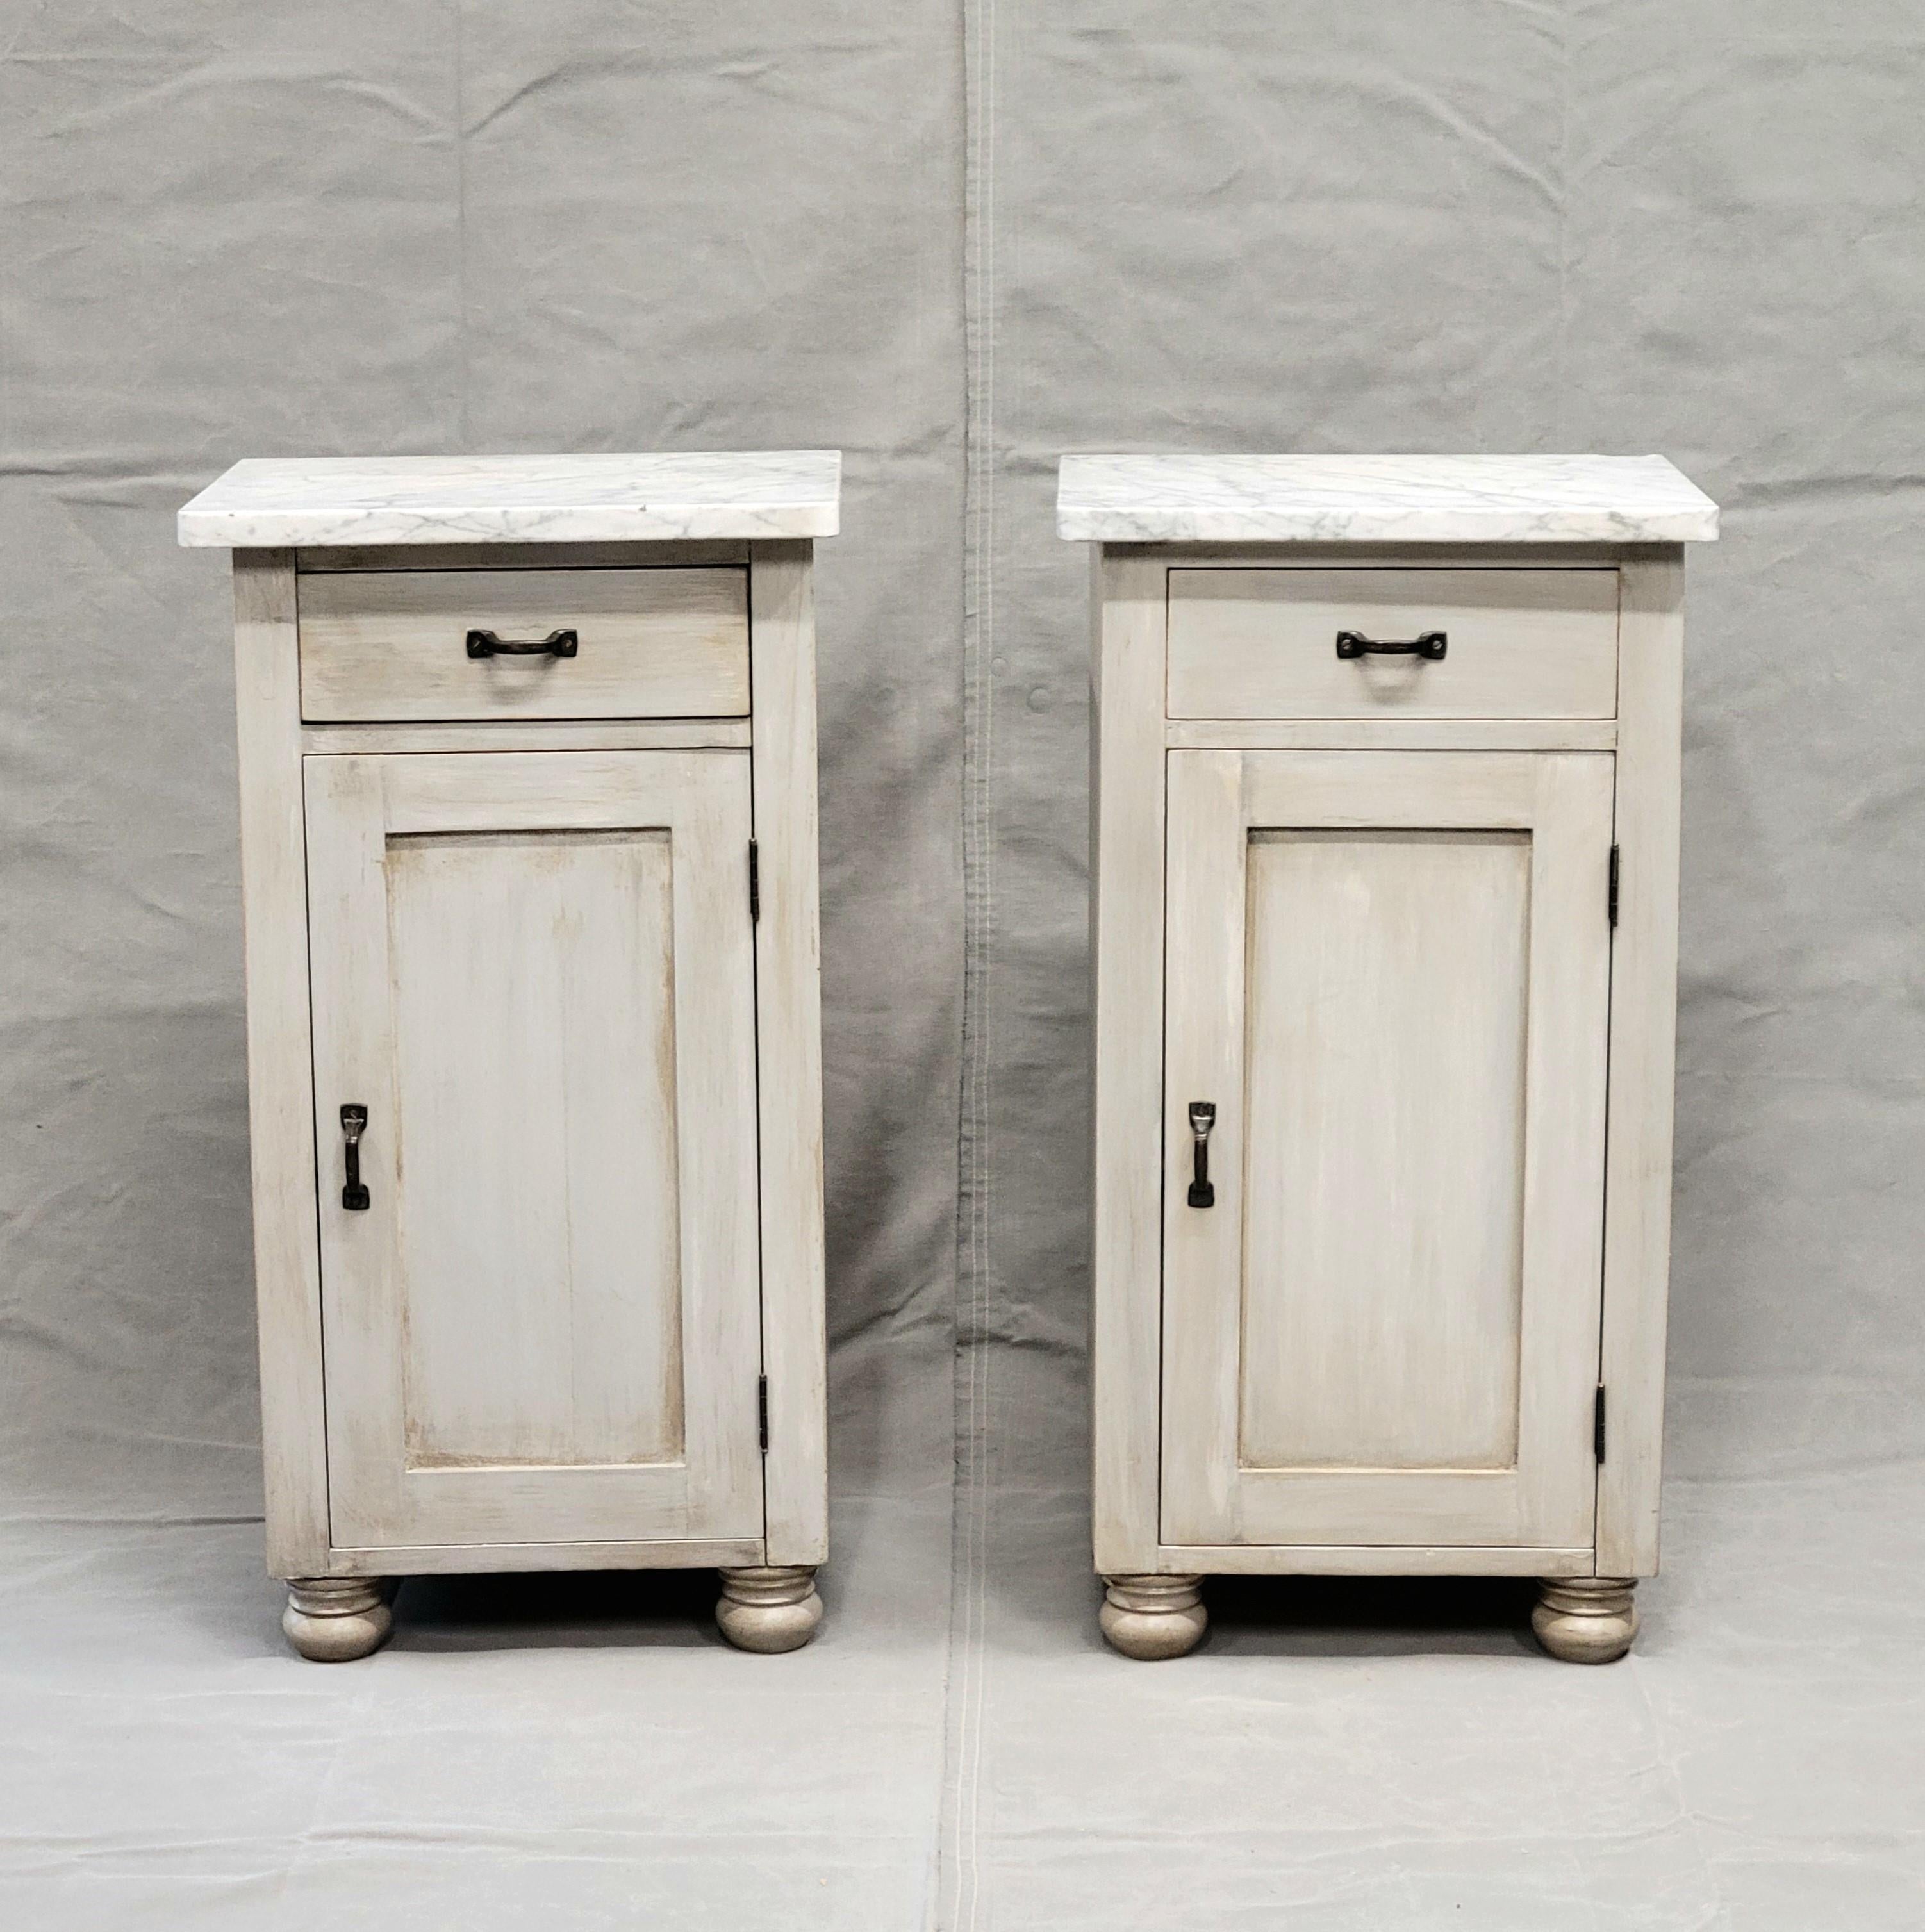 A beautiful and functional pair of rustic farmhouse style nightstands. Crafted of pine shiplap and painted in a pale grey. Removable old carrera marble tops. Old brass hardware. Paint is recent and applied in the antique manner so there are no